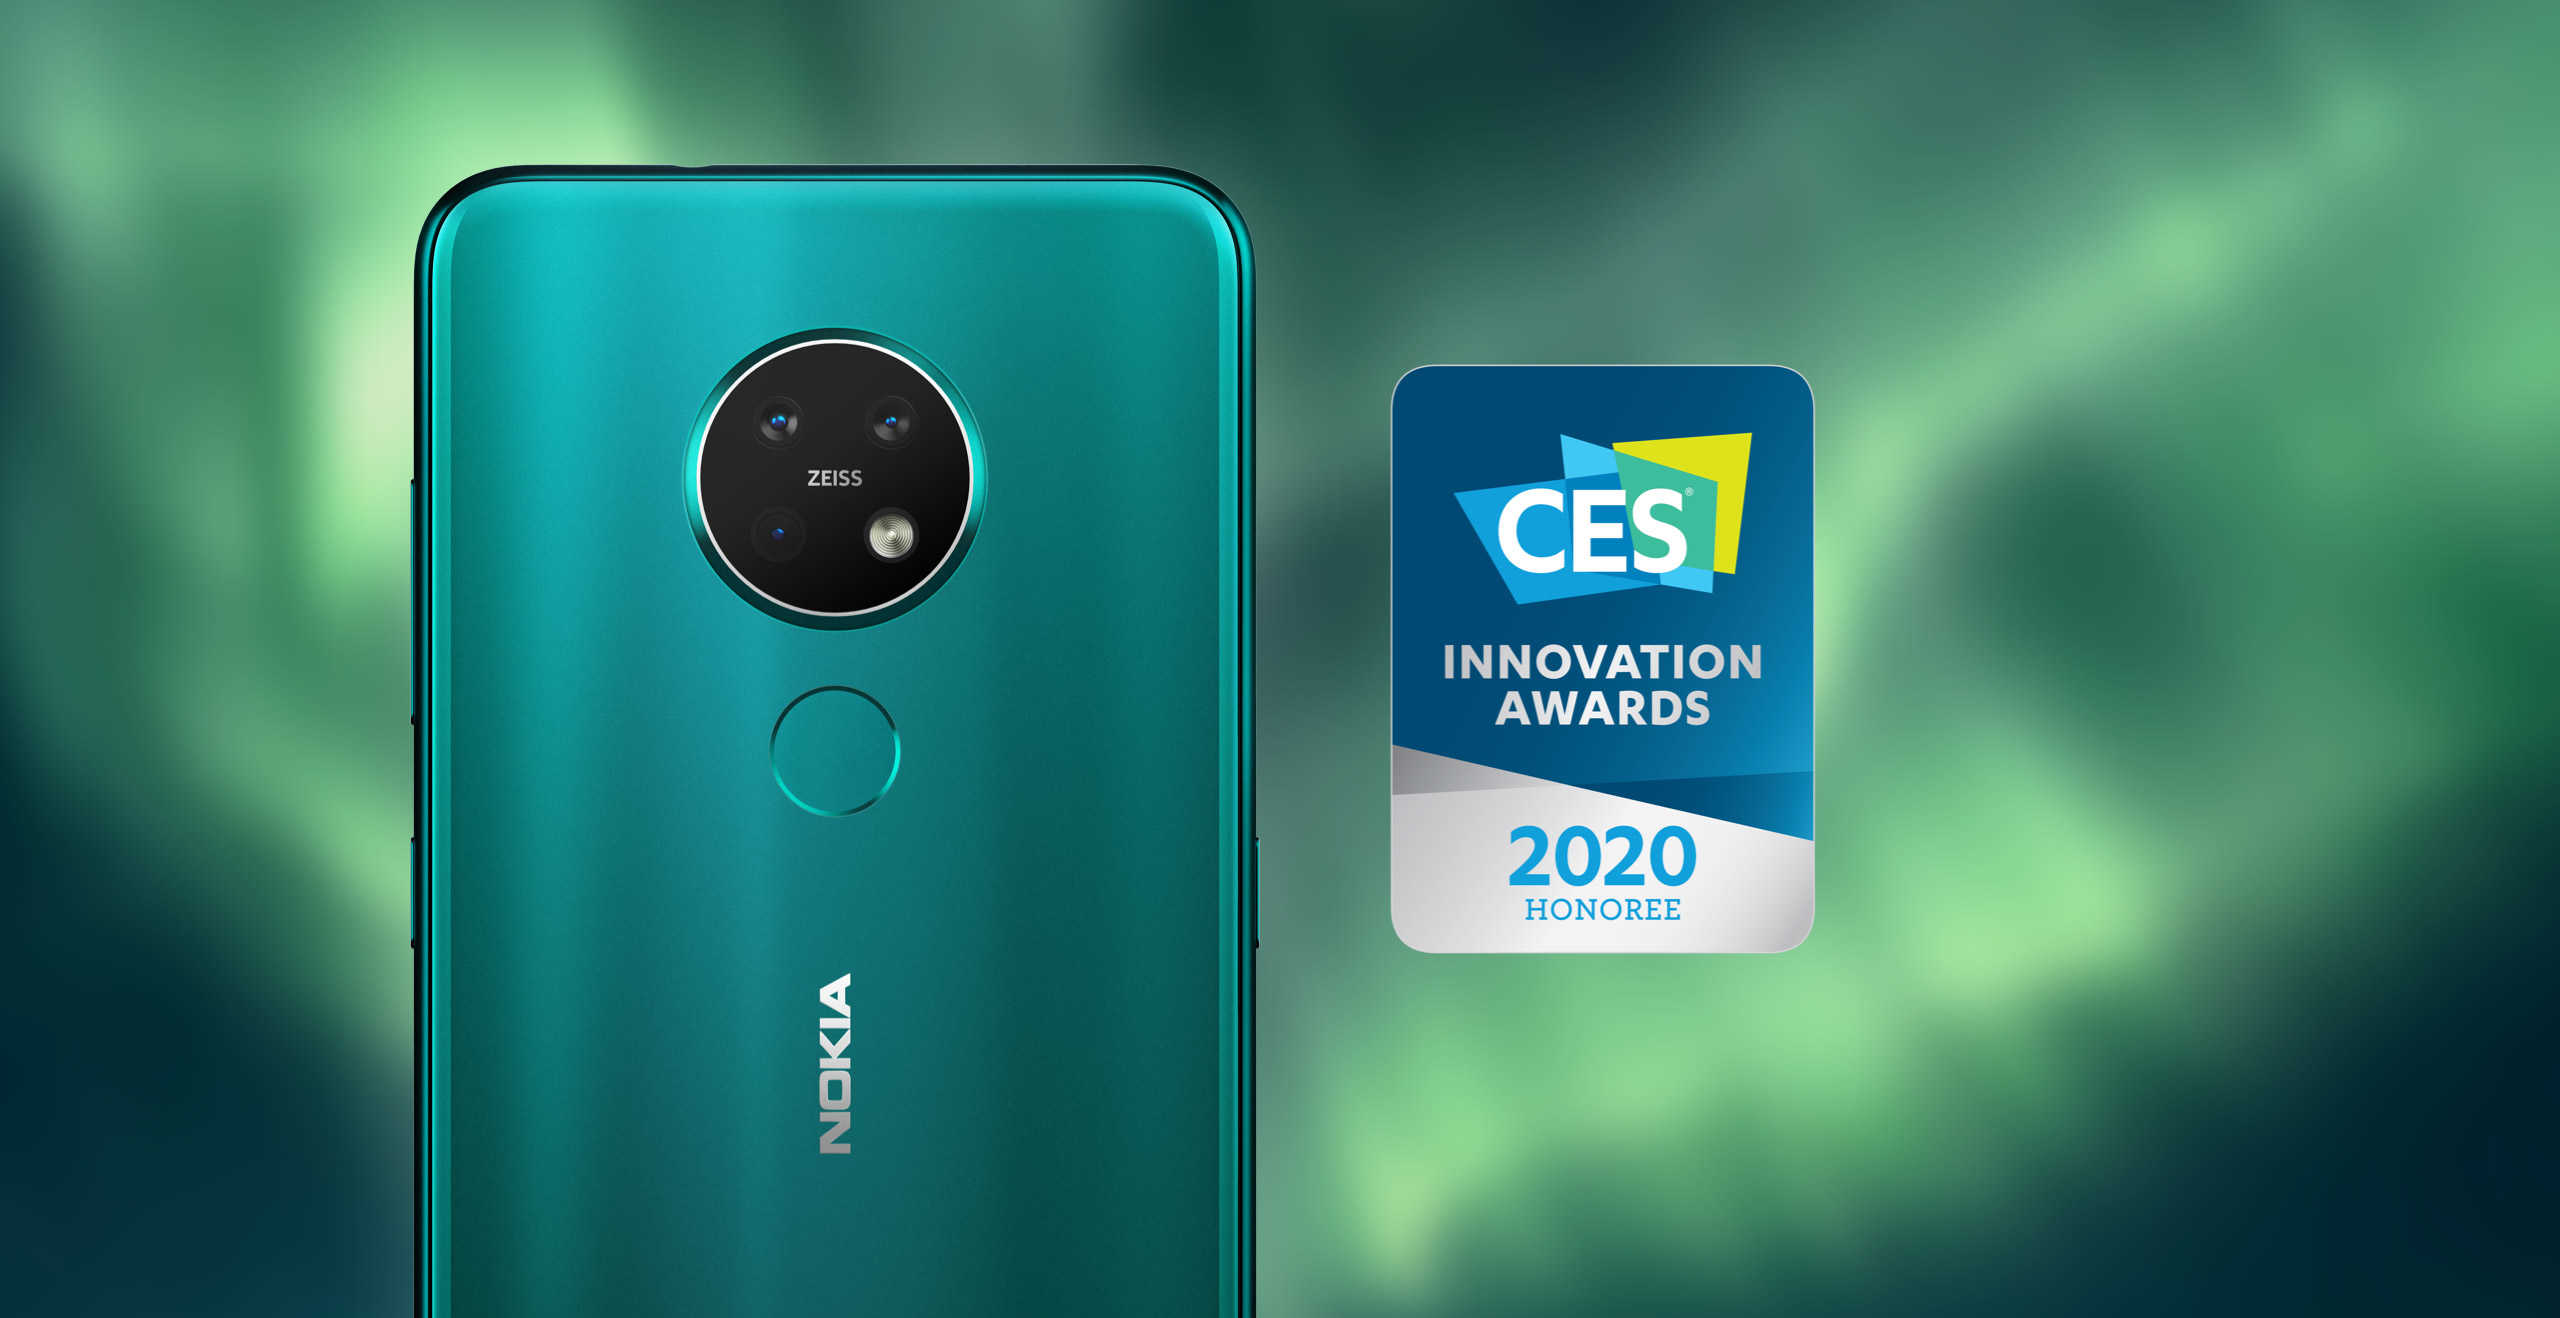 Nokia and HMD join growing list of companies pulling out of MWC 2020